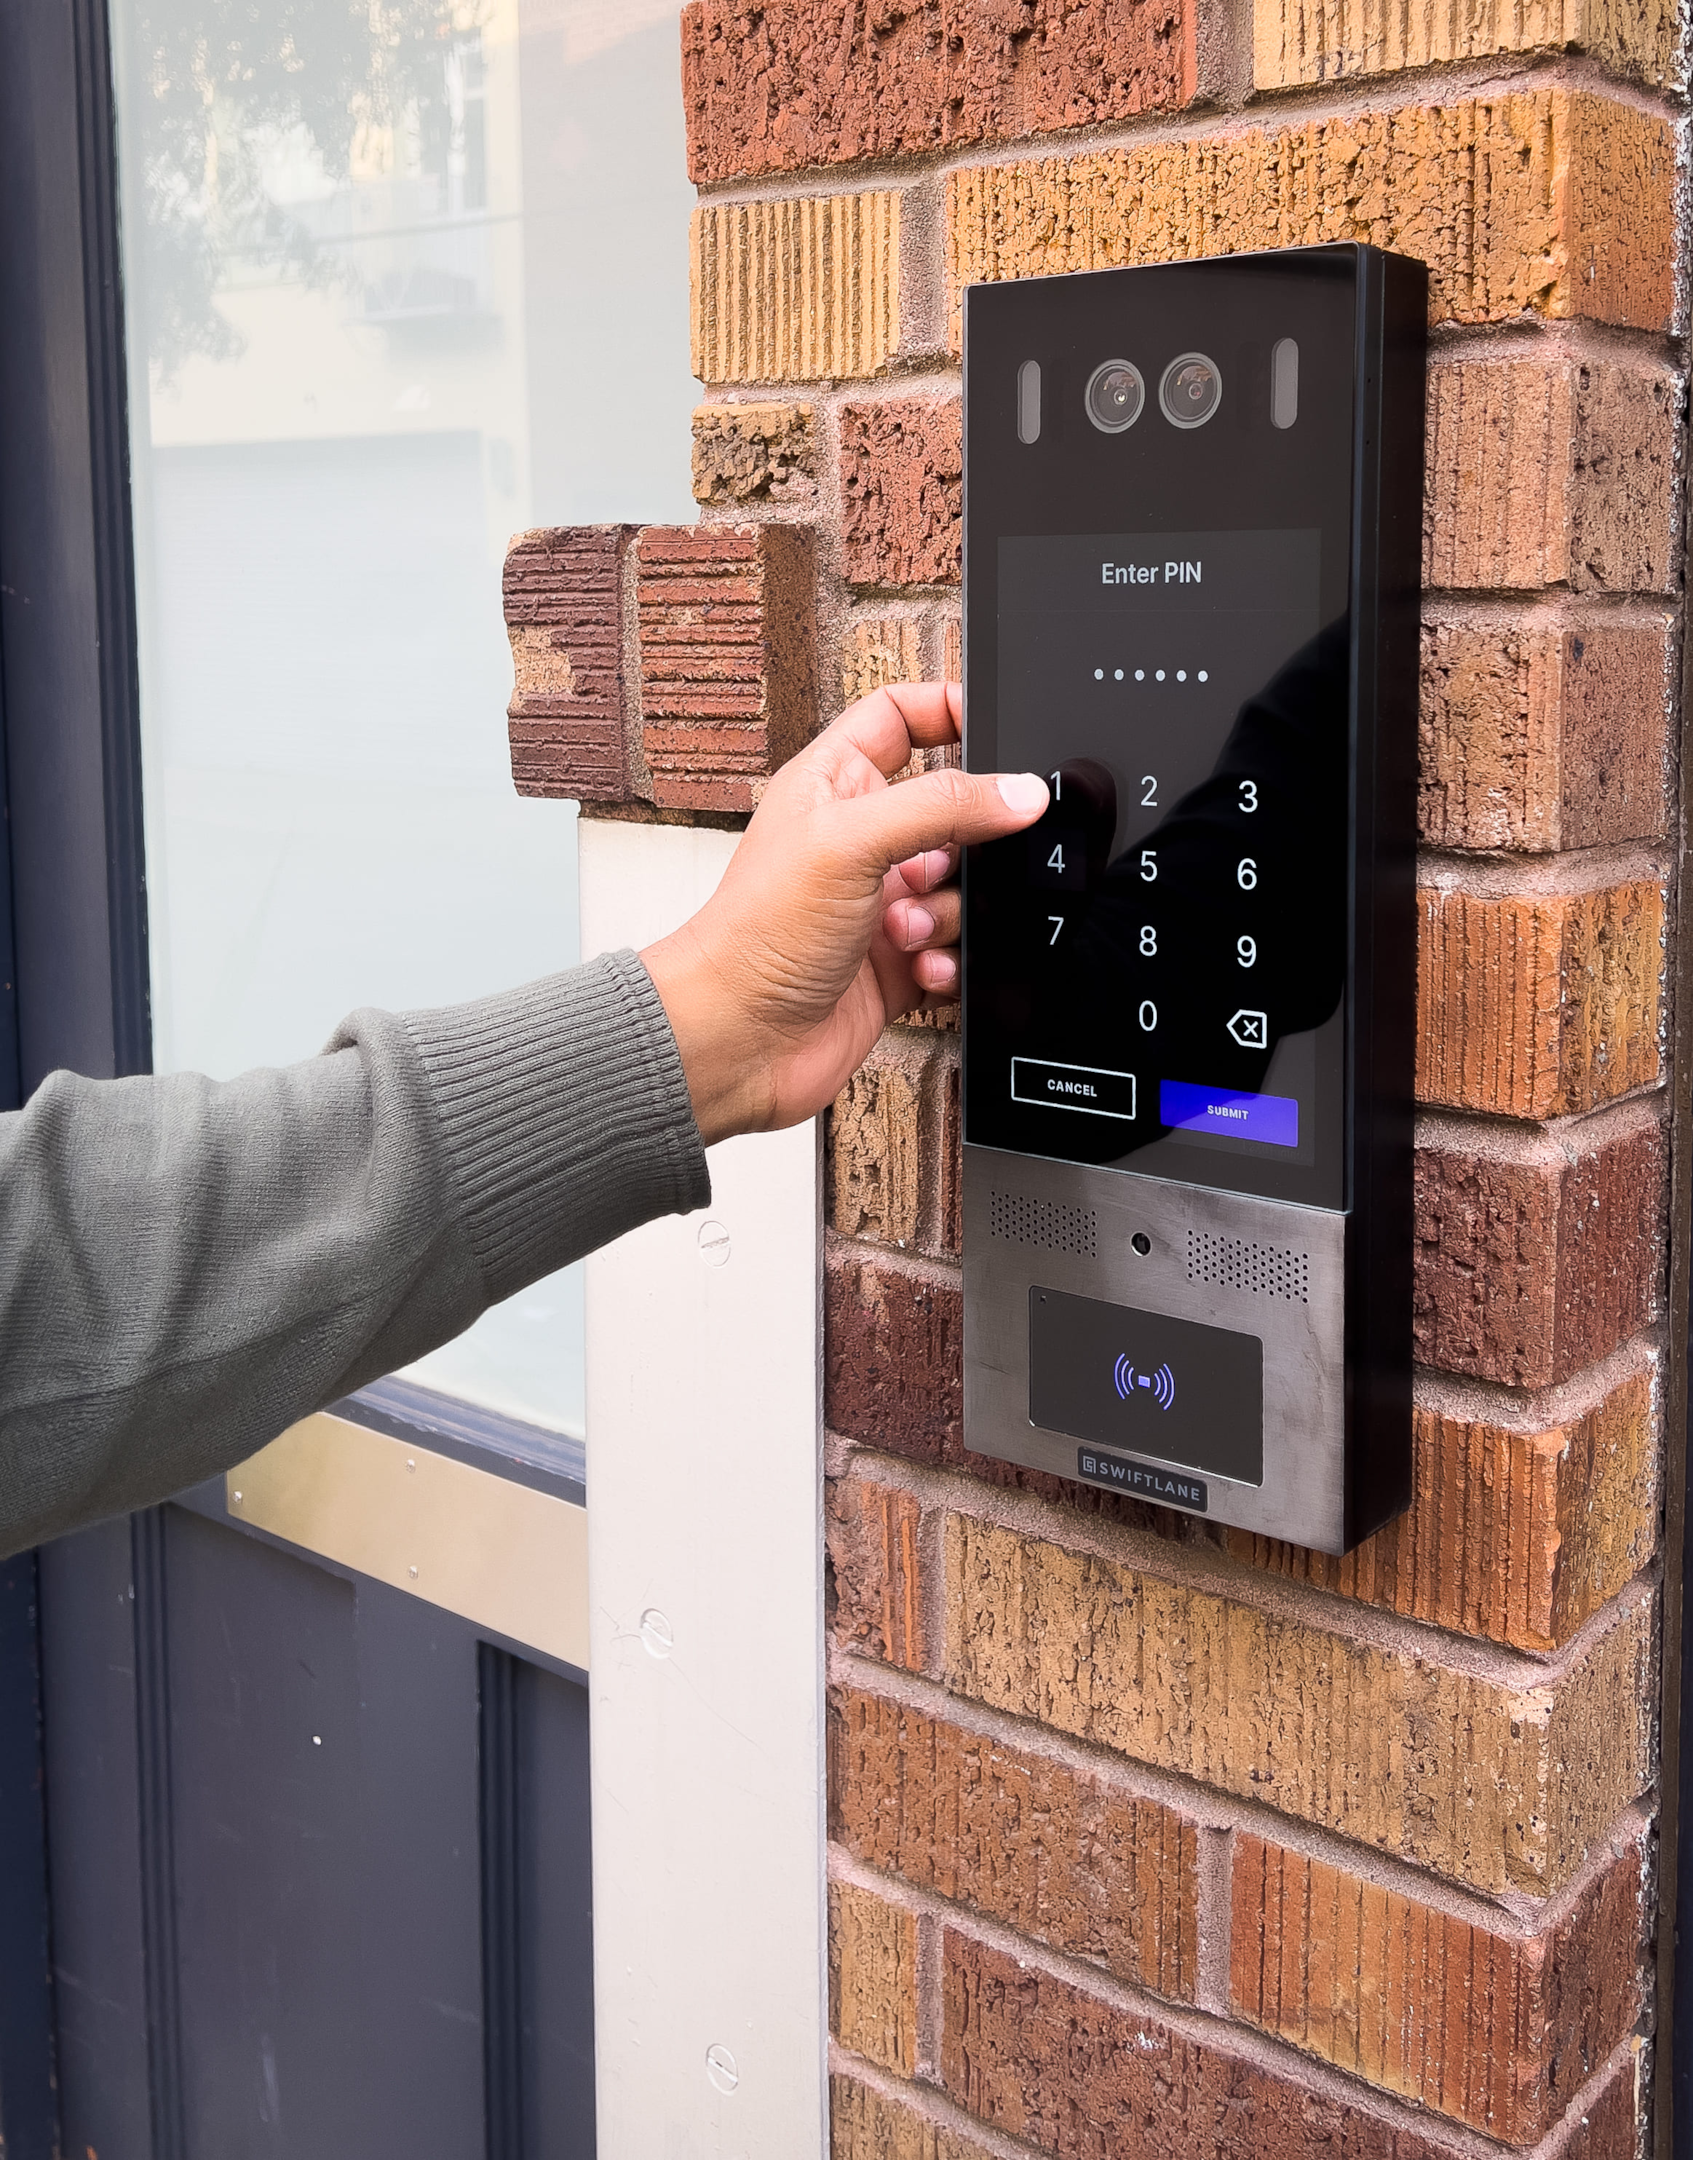 Keypad Readers: A classic form of access control systems